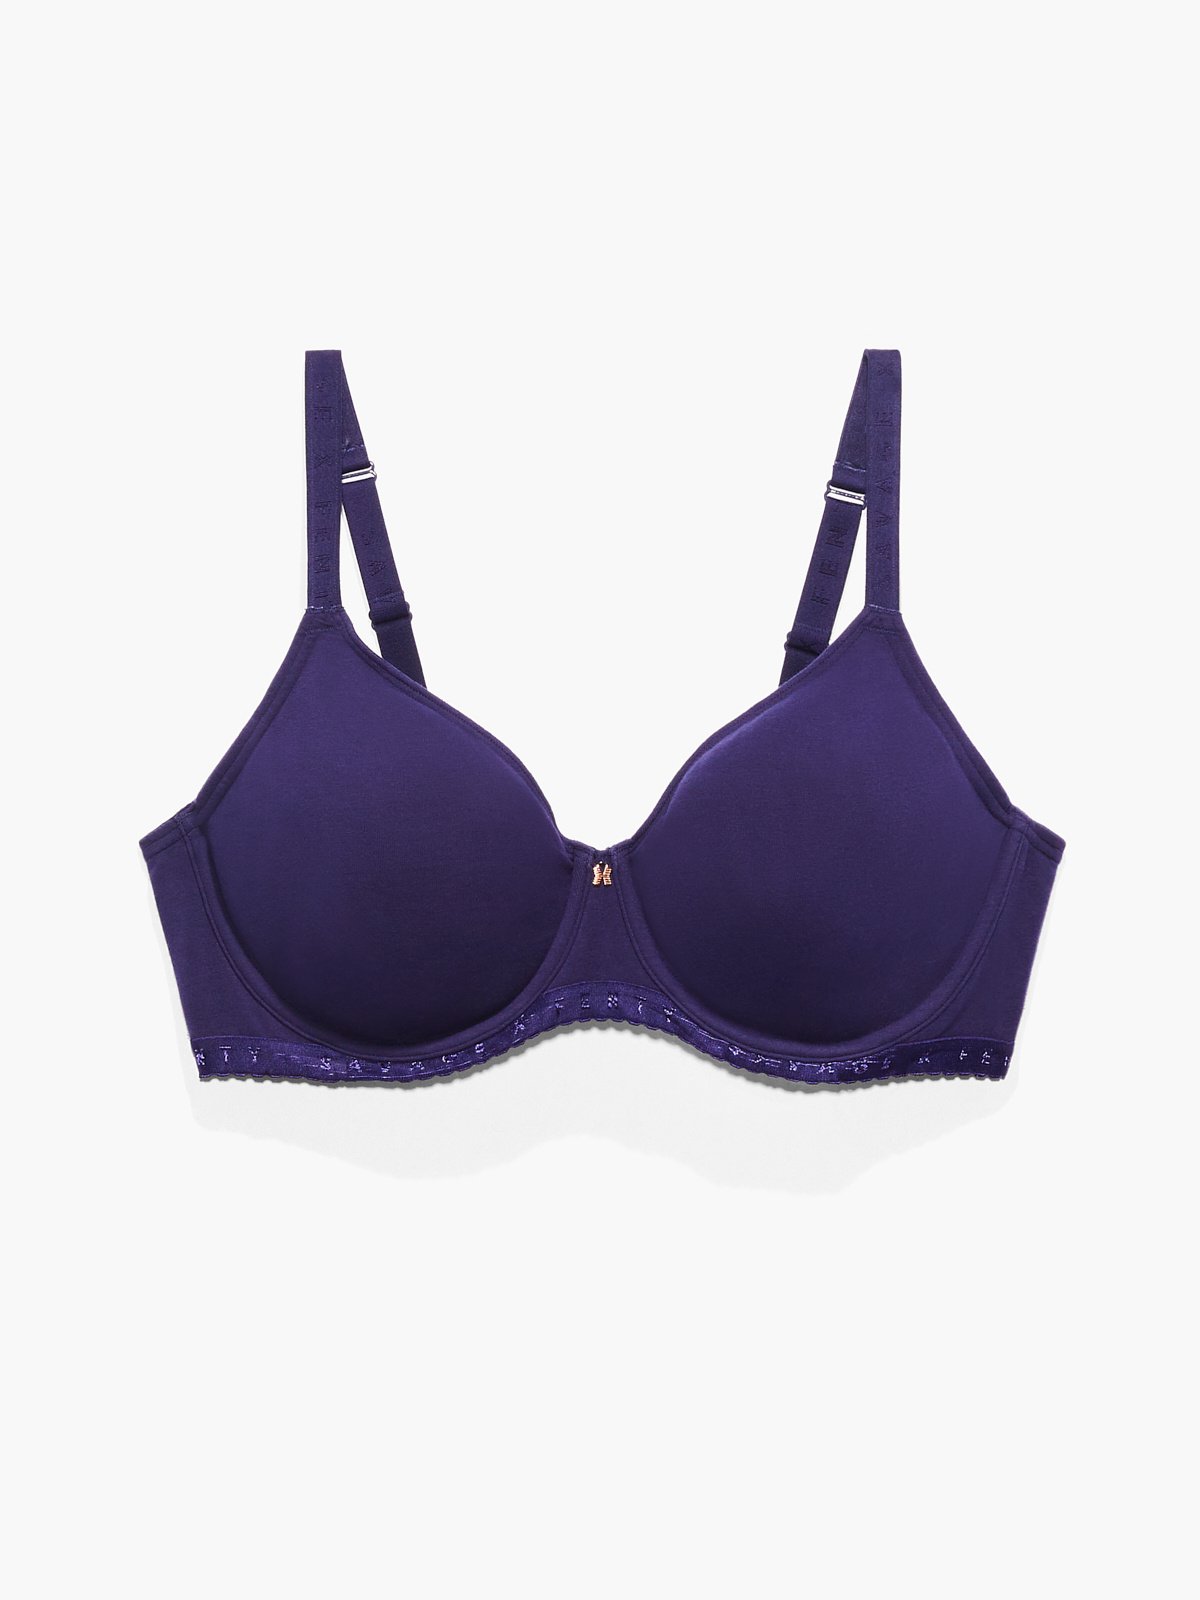 Unlined Ladies Thin Strap Non-padded Blue Plain Cotton Bra at Best